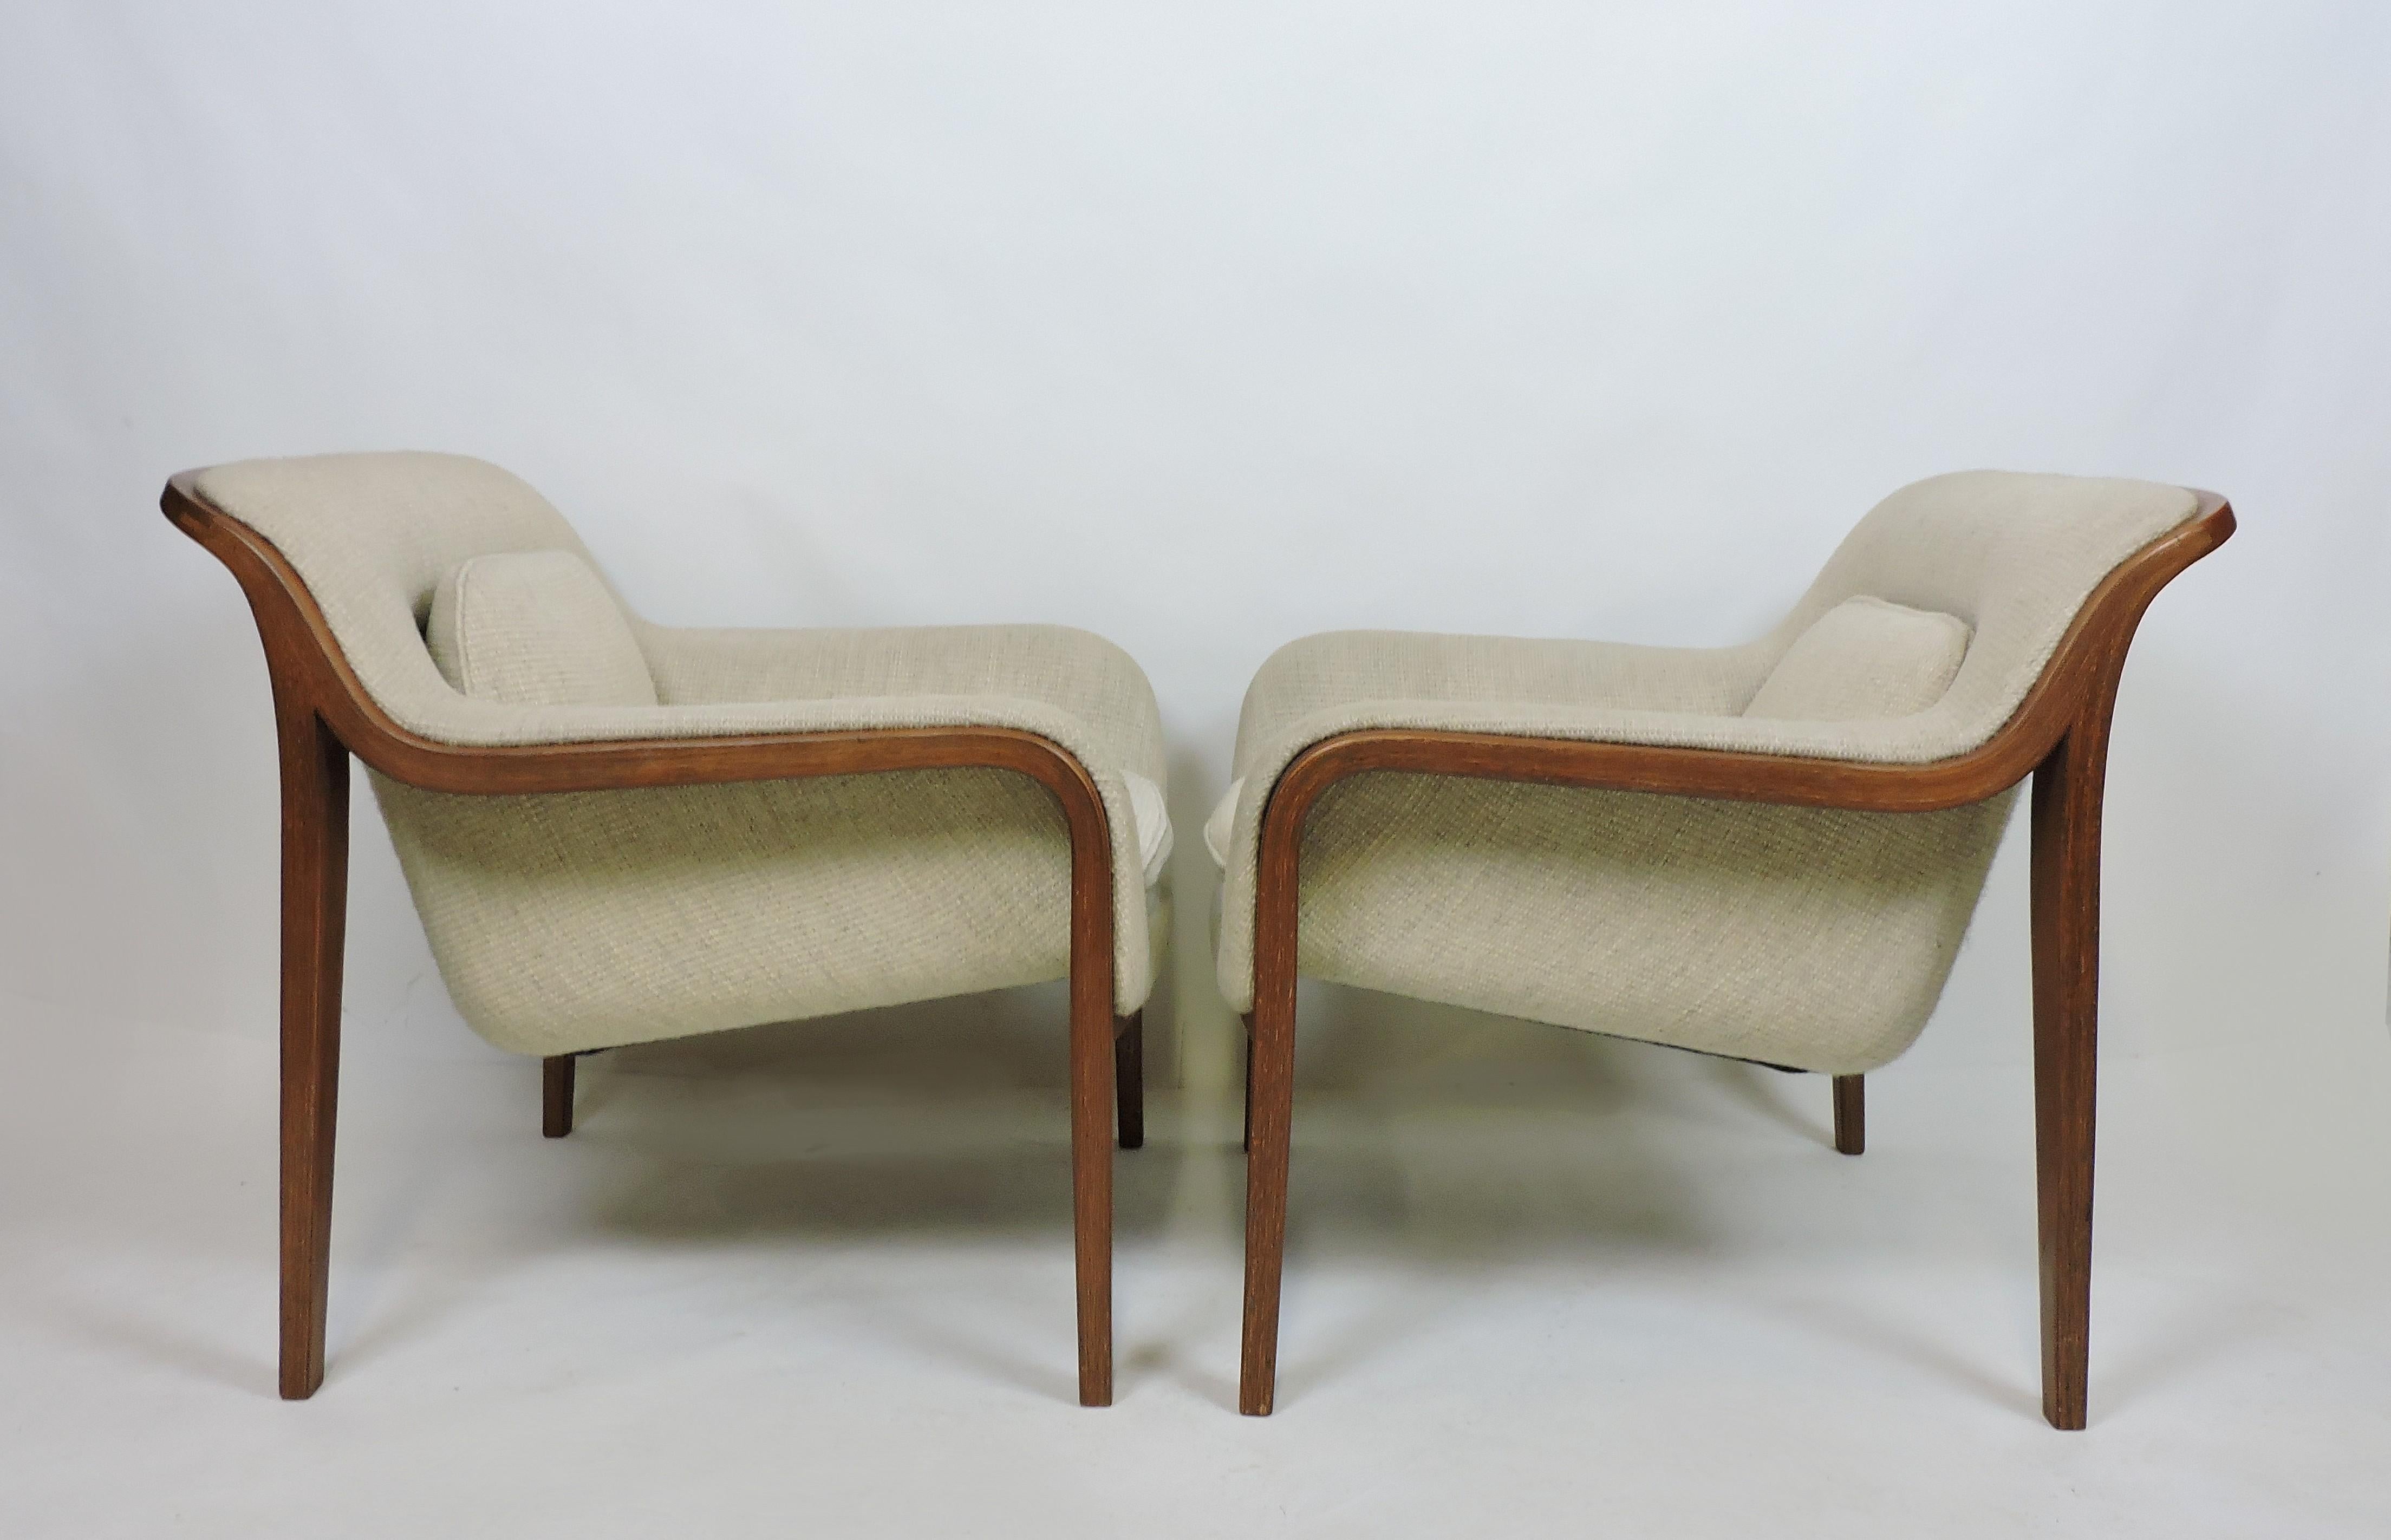 Beautiful pair of model #1315 lounge chairs designed by Bill Stephens for Knoll. These chairs have graceful sculptural bentwood frames and are upholstered in the original oatmeal colored nubby upholstery. Knoll labels underneath.
   